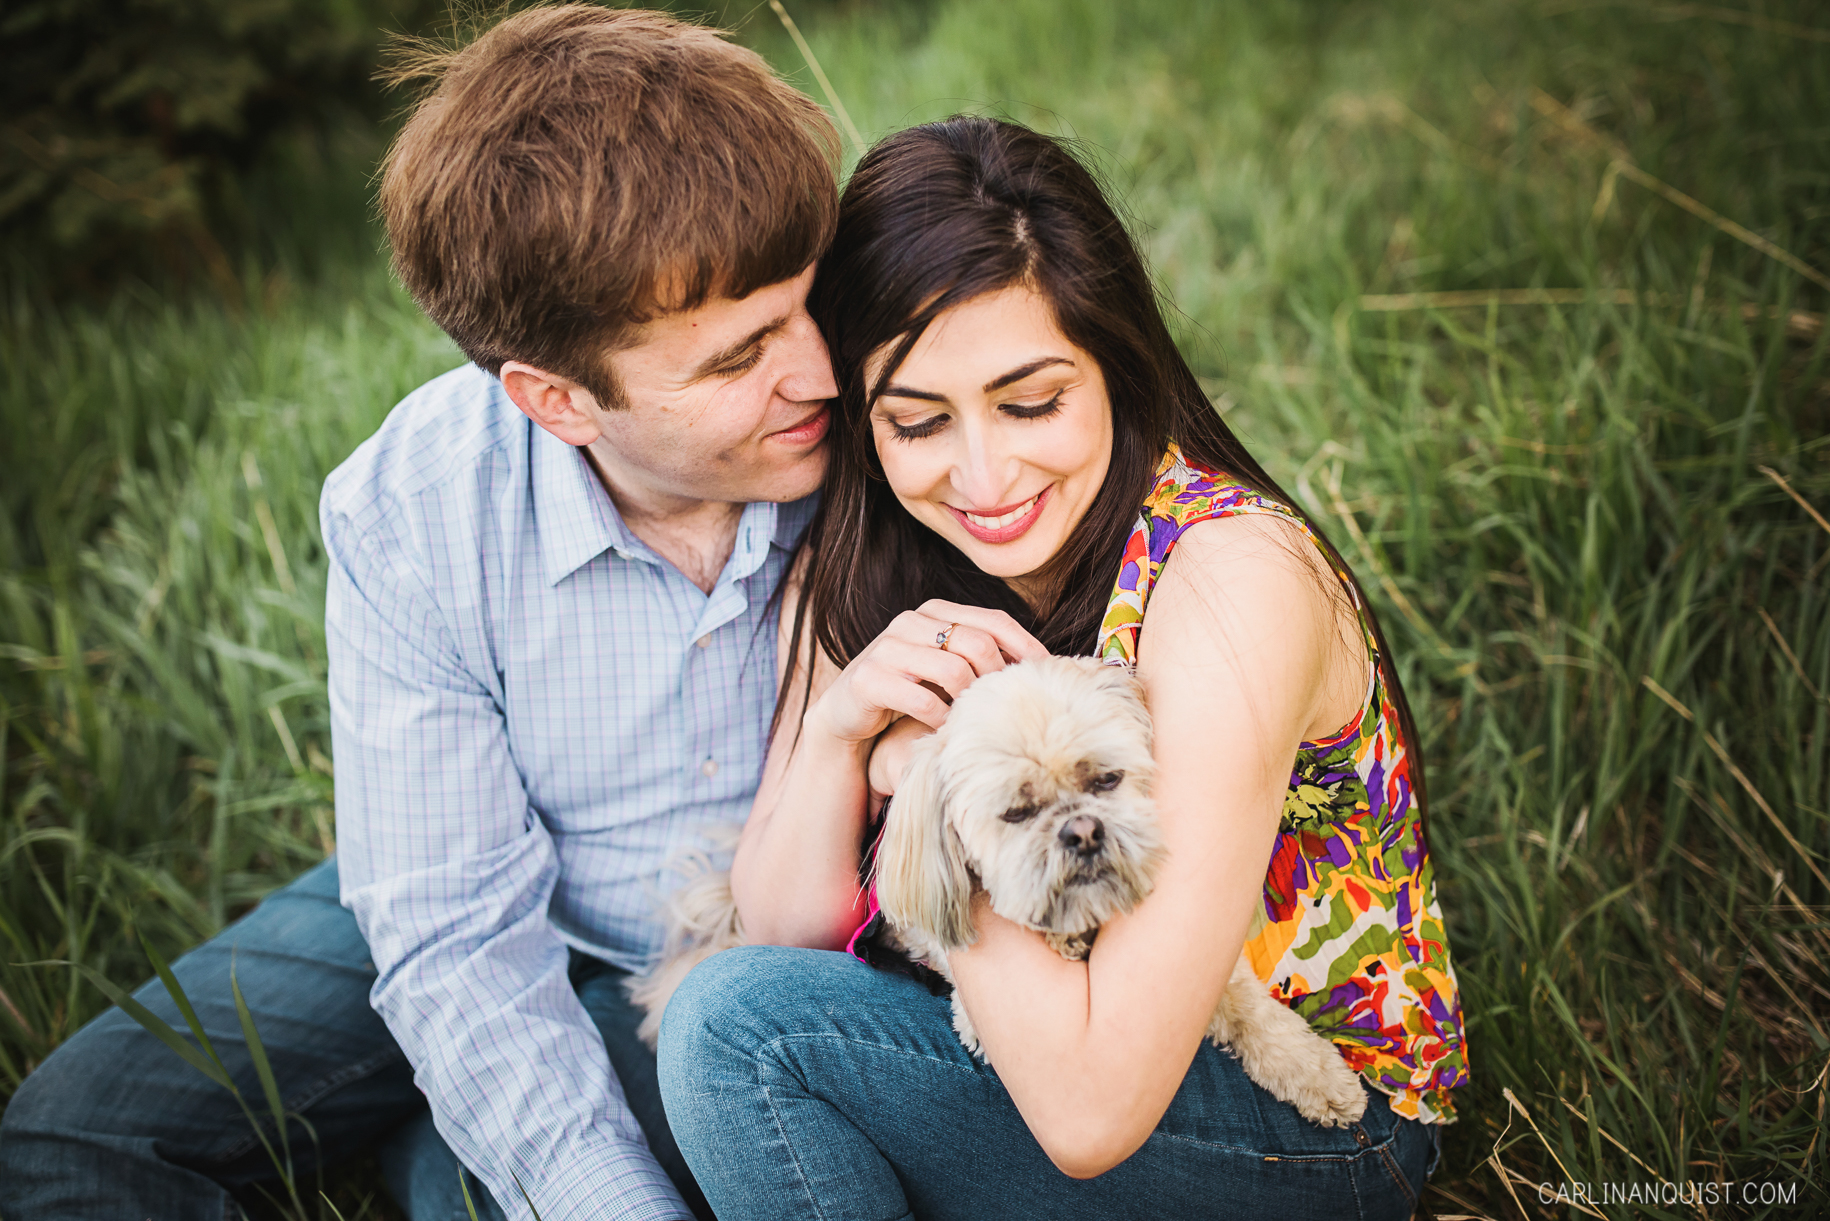 Spring Engagement Photos with Dogs | Calgary Wedding Photographer